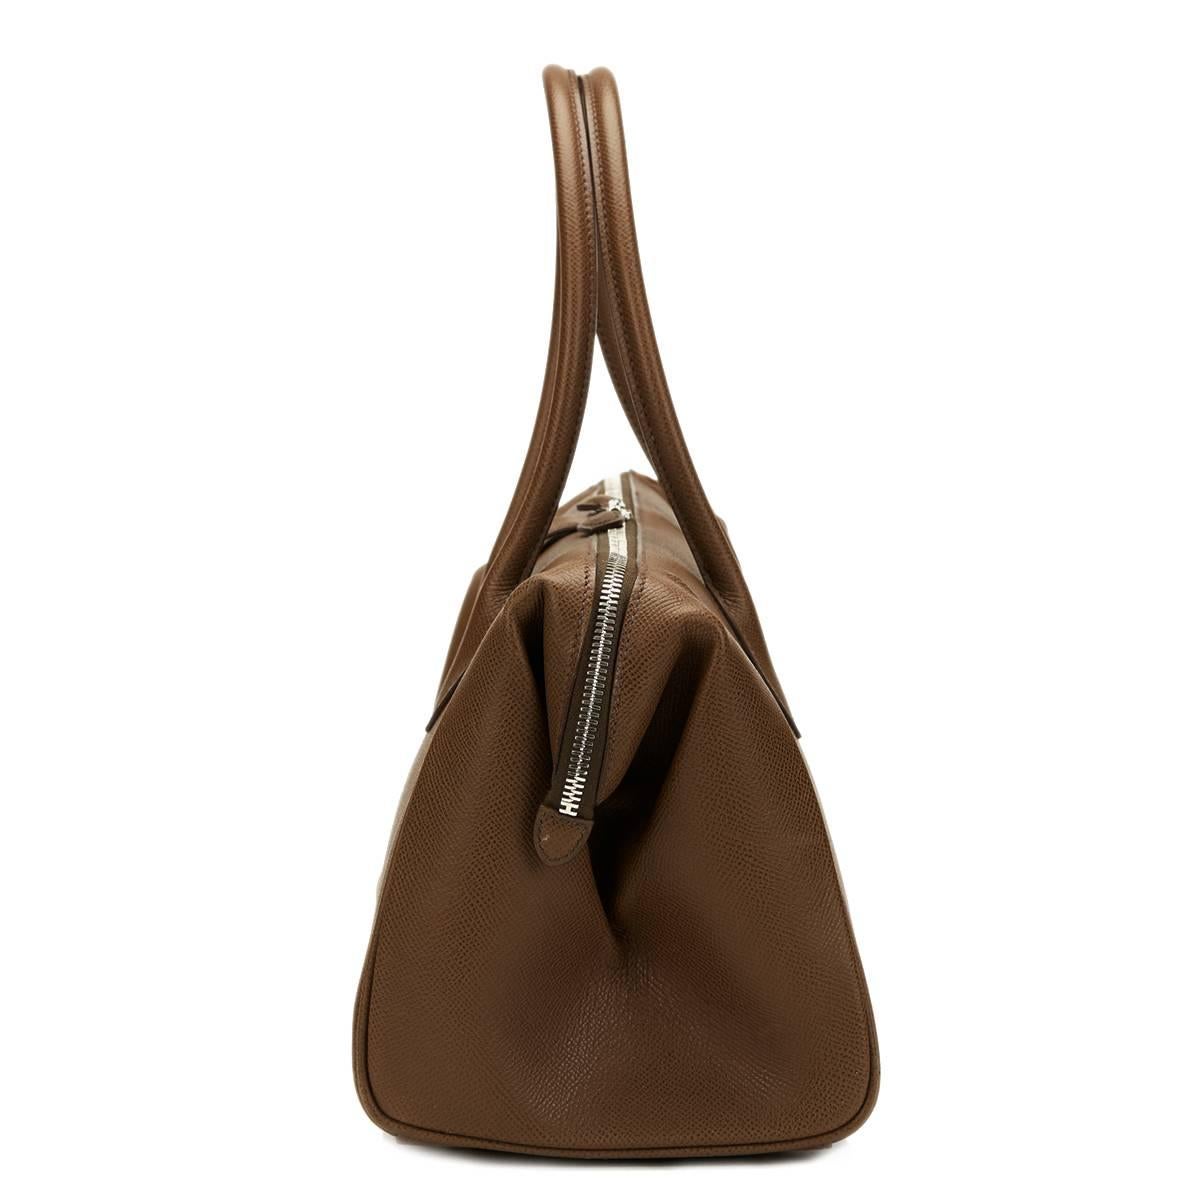 HERMÈS
Chocolate Epsom Leather Paris Bombay

This HERMÈS Paris Bombay is in Good Pre-Owned Condition. Circa 2007. Primarily made from Epsom Leather complimented by Palladium hardware. Our  reference is HB758 should you need to quote this.

